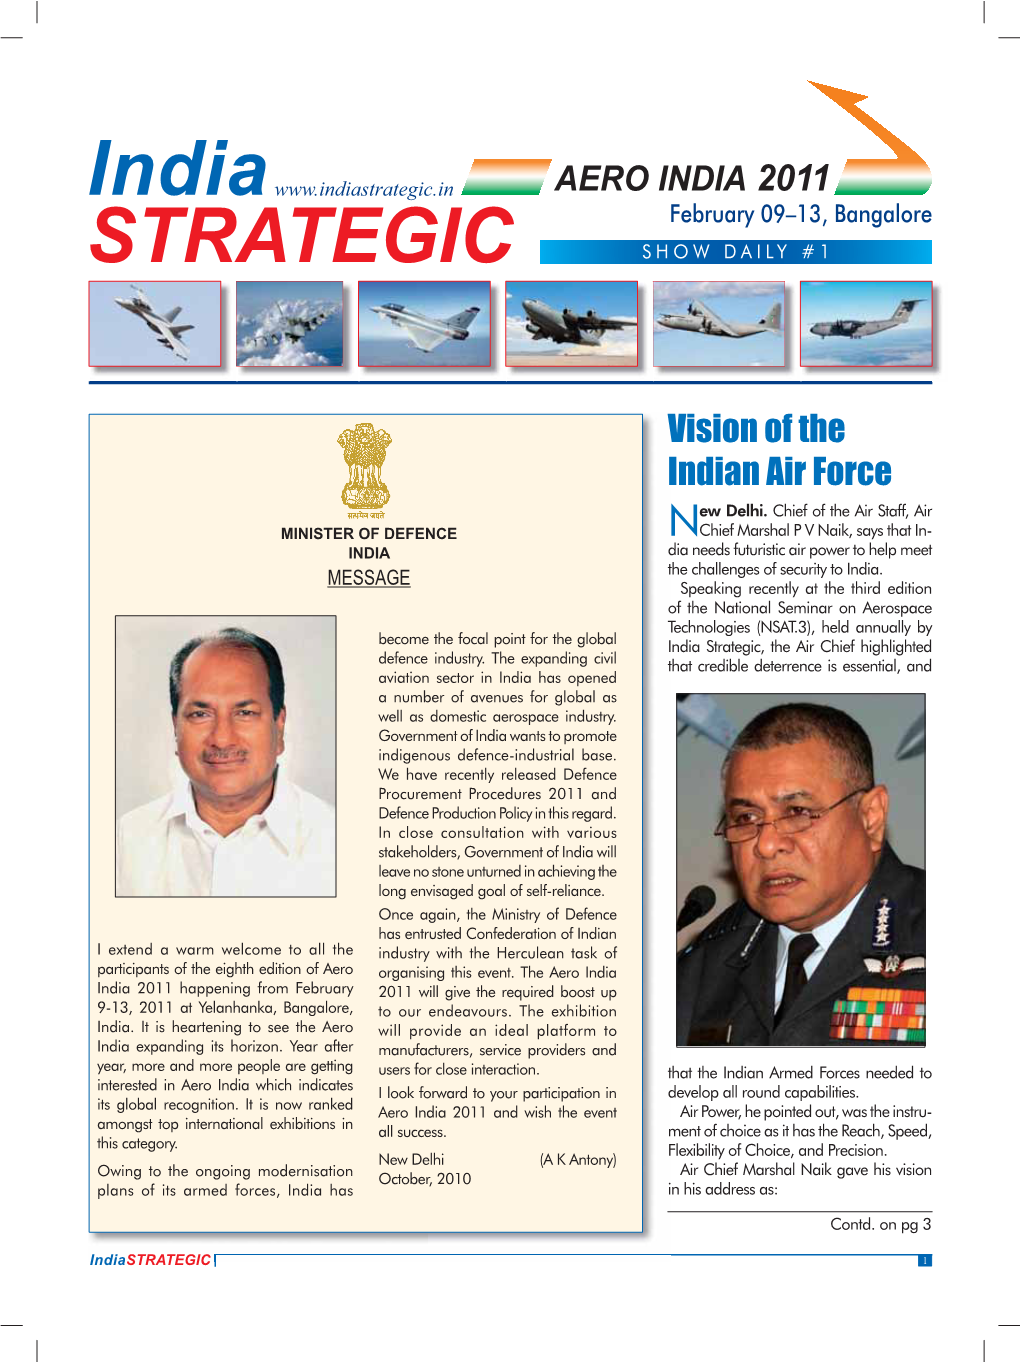 AERO INDIA 2011 Vision of the Indian Air Force